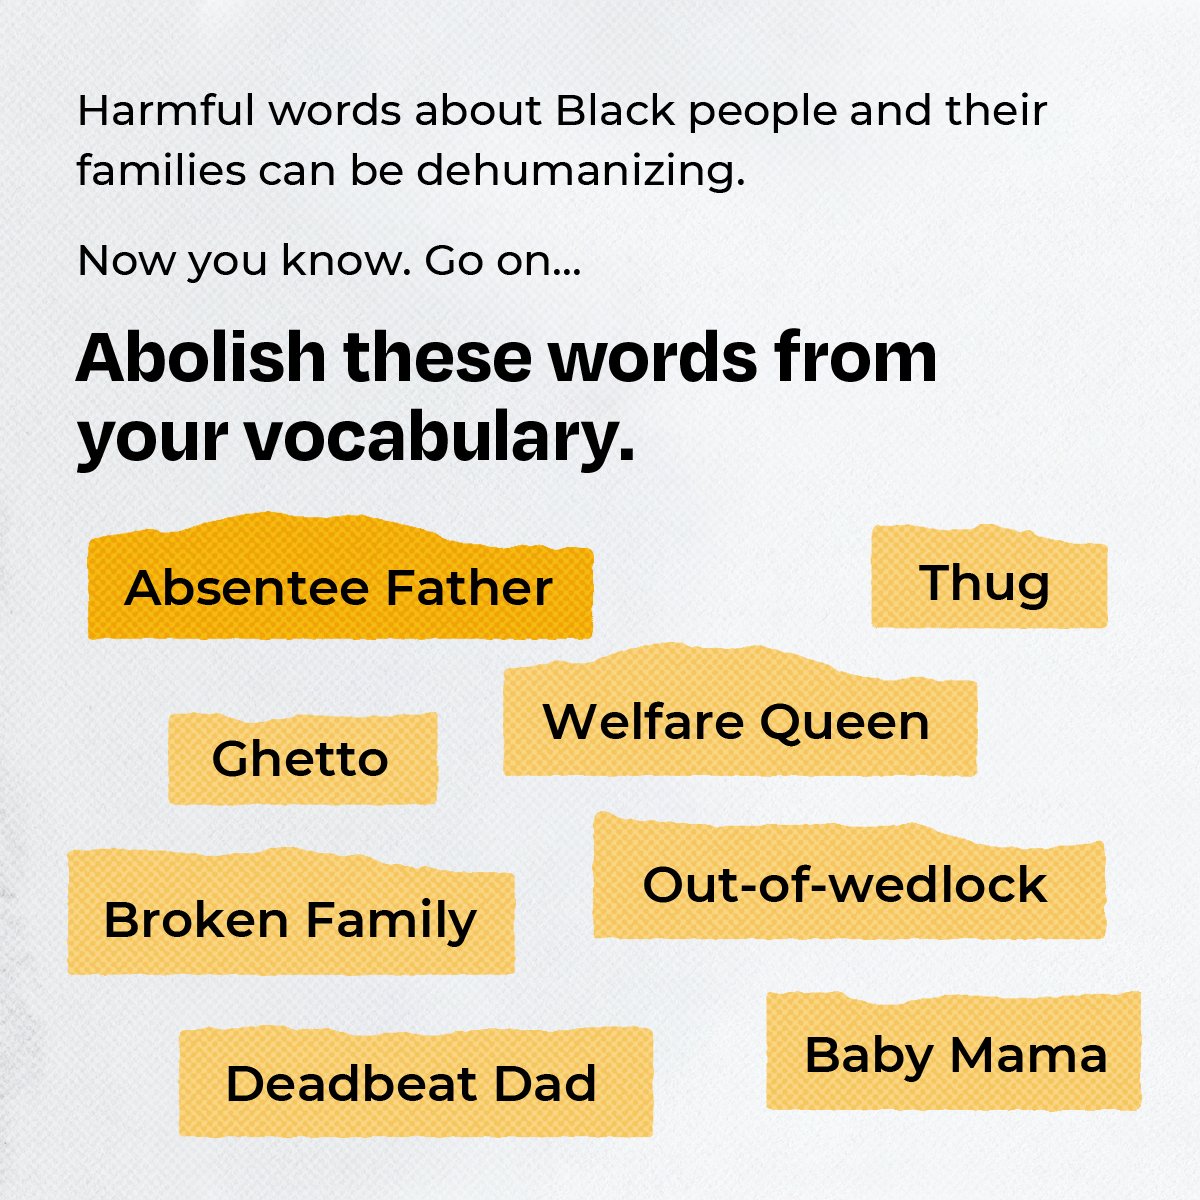 Systemic racism has taken many Black fathers away from their families and communities. Stop the spread of racist narratives against  #BlackFamilies and abolish “absentee father” from your vocabulary today.  #AbolishRacistTerms  https://colorofchange.org/narrativepower/ 